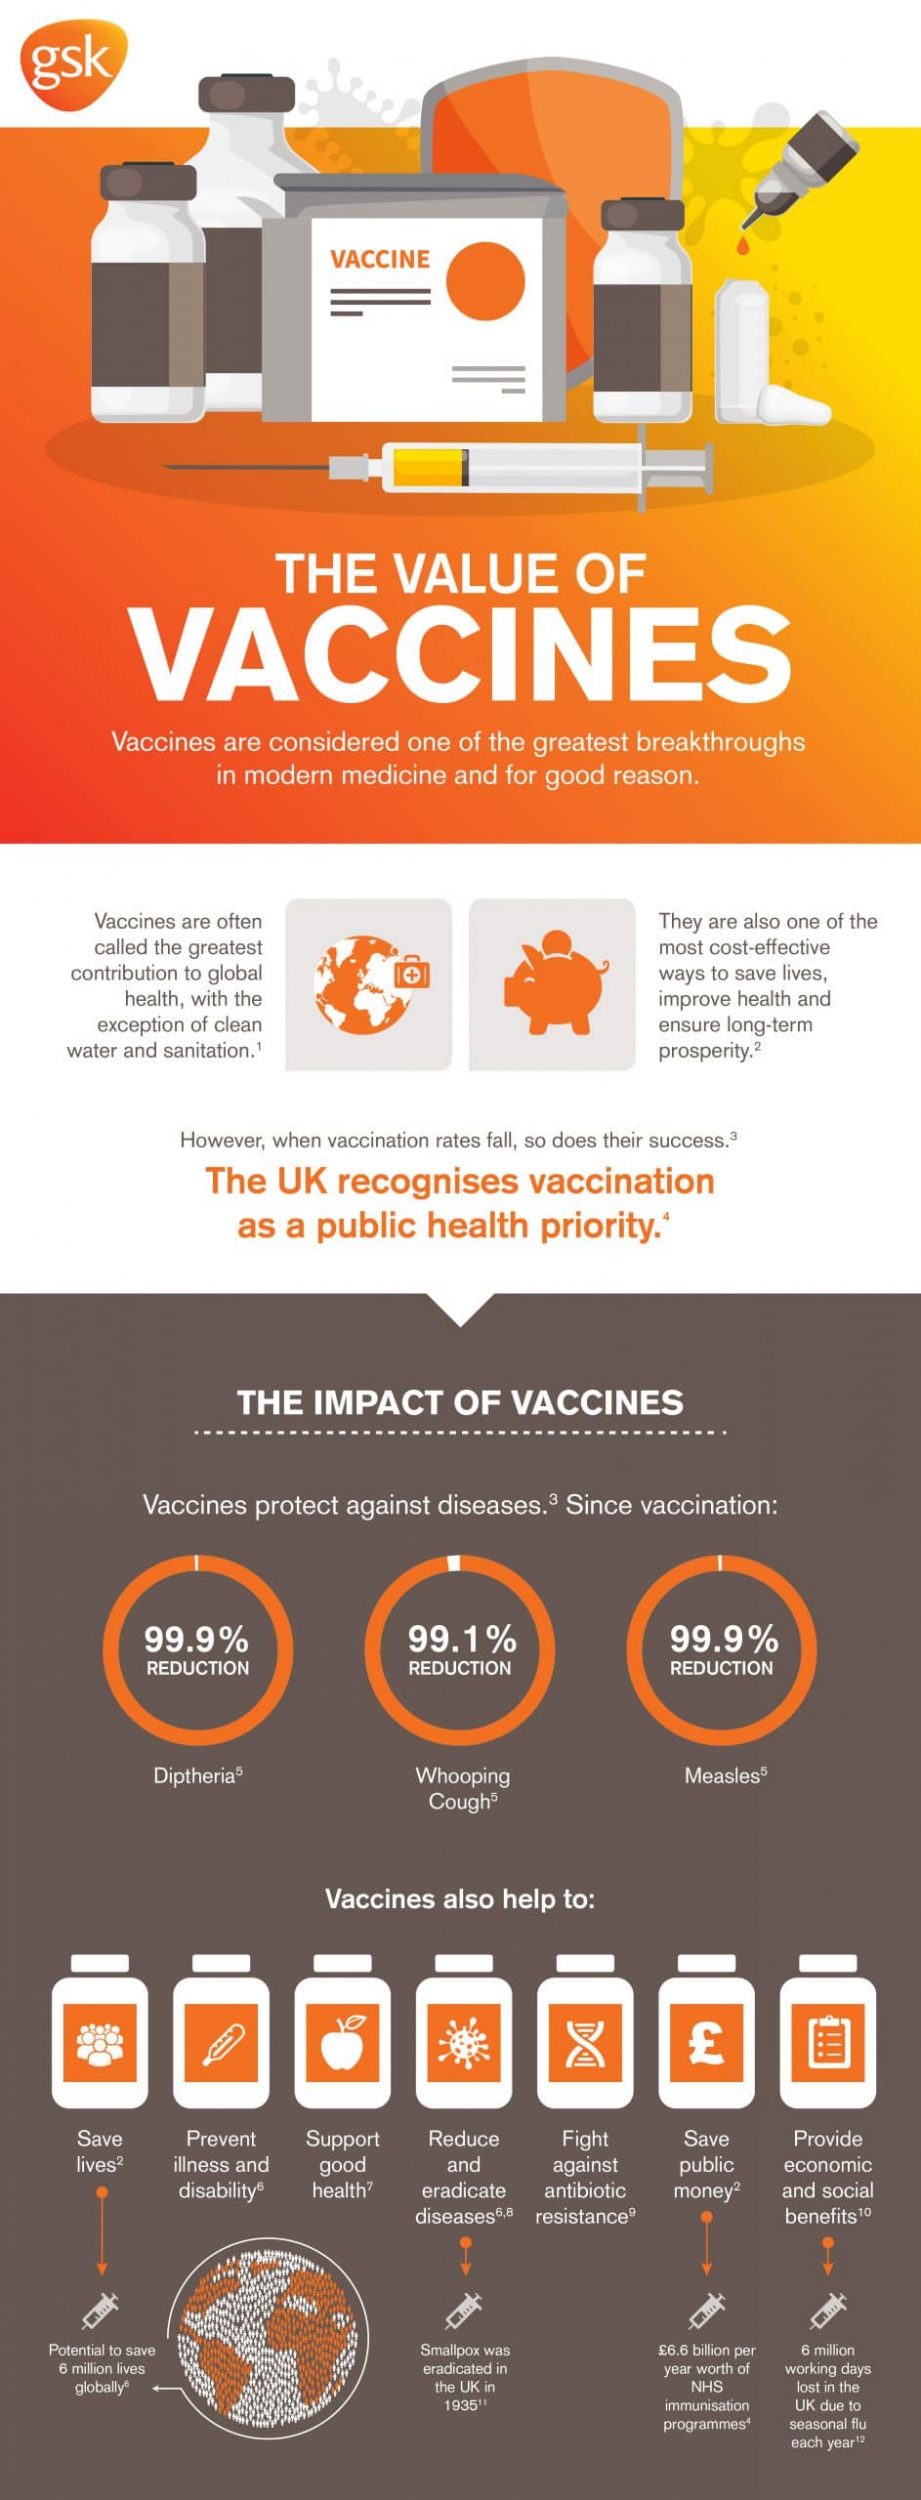 gsk vaccines a scaled scaled